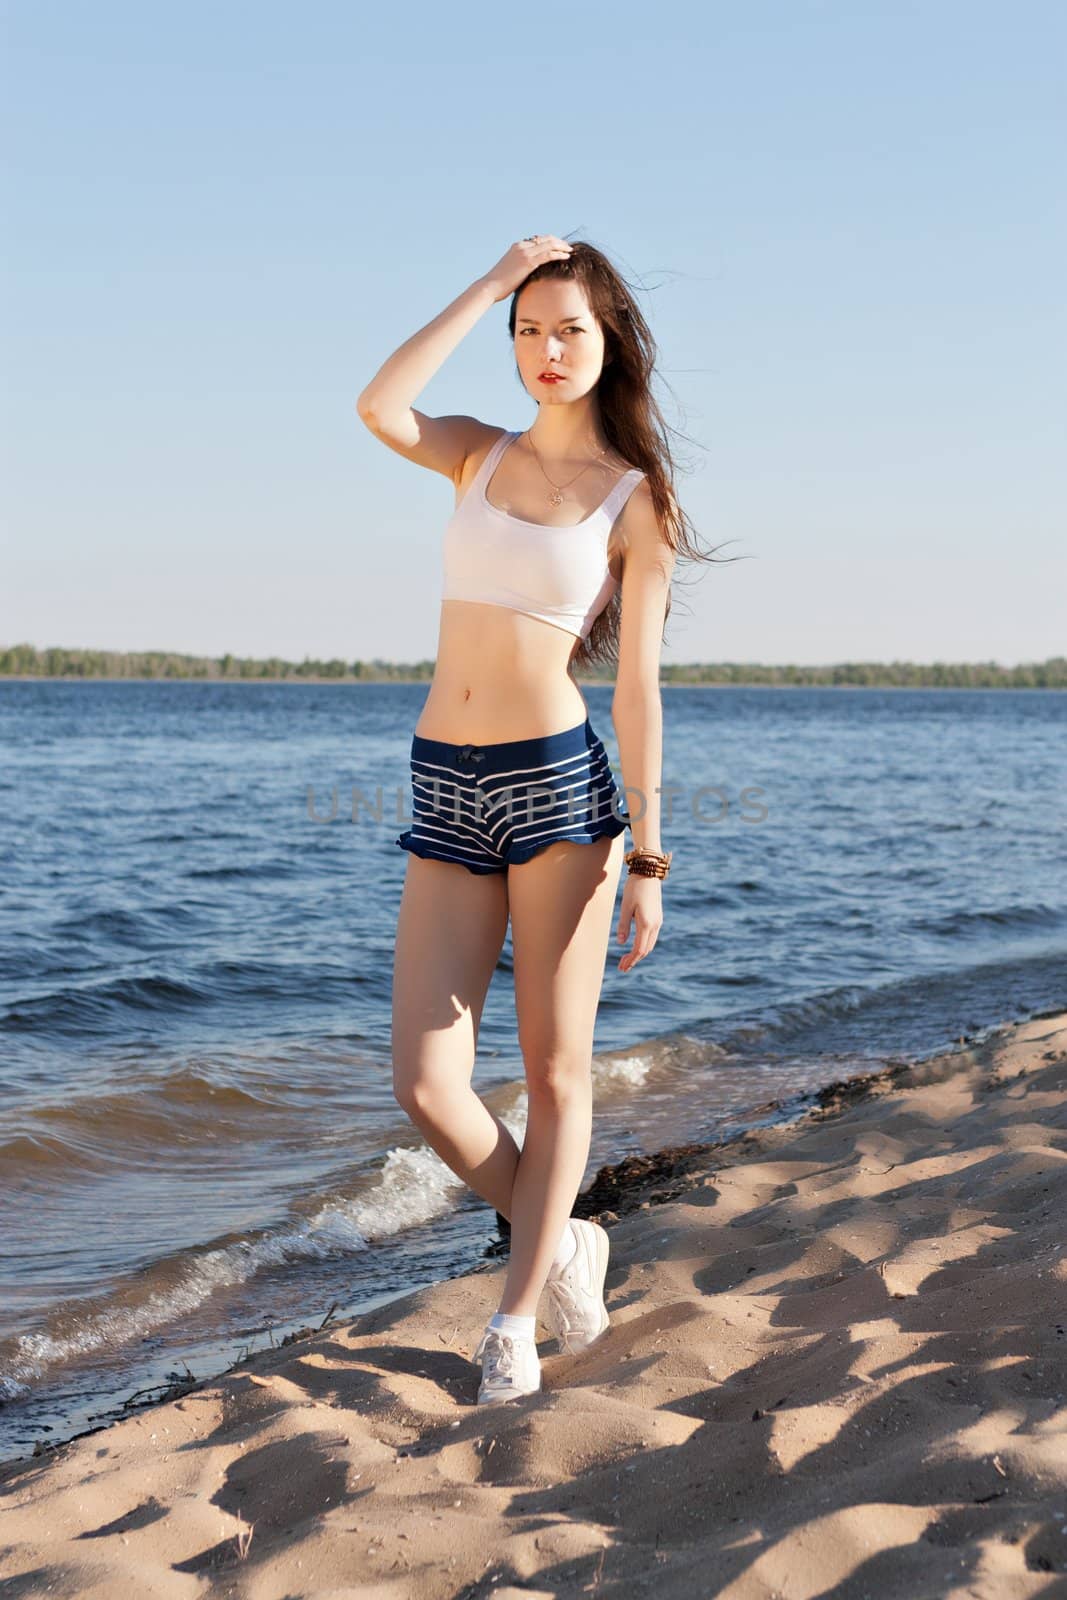 A beautiful woman on the beach in shorts.